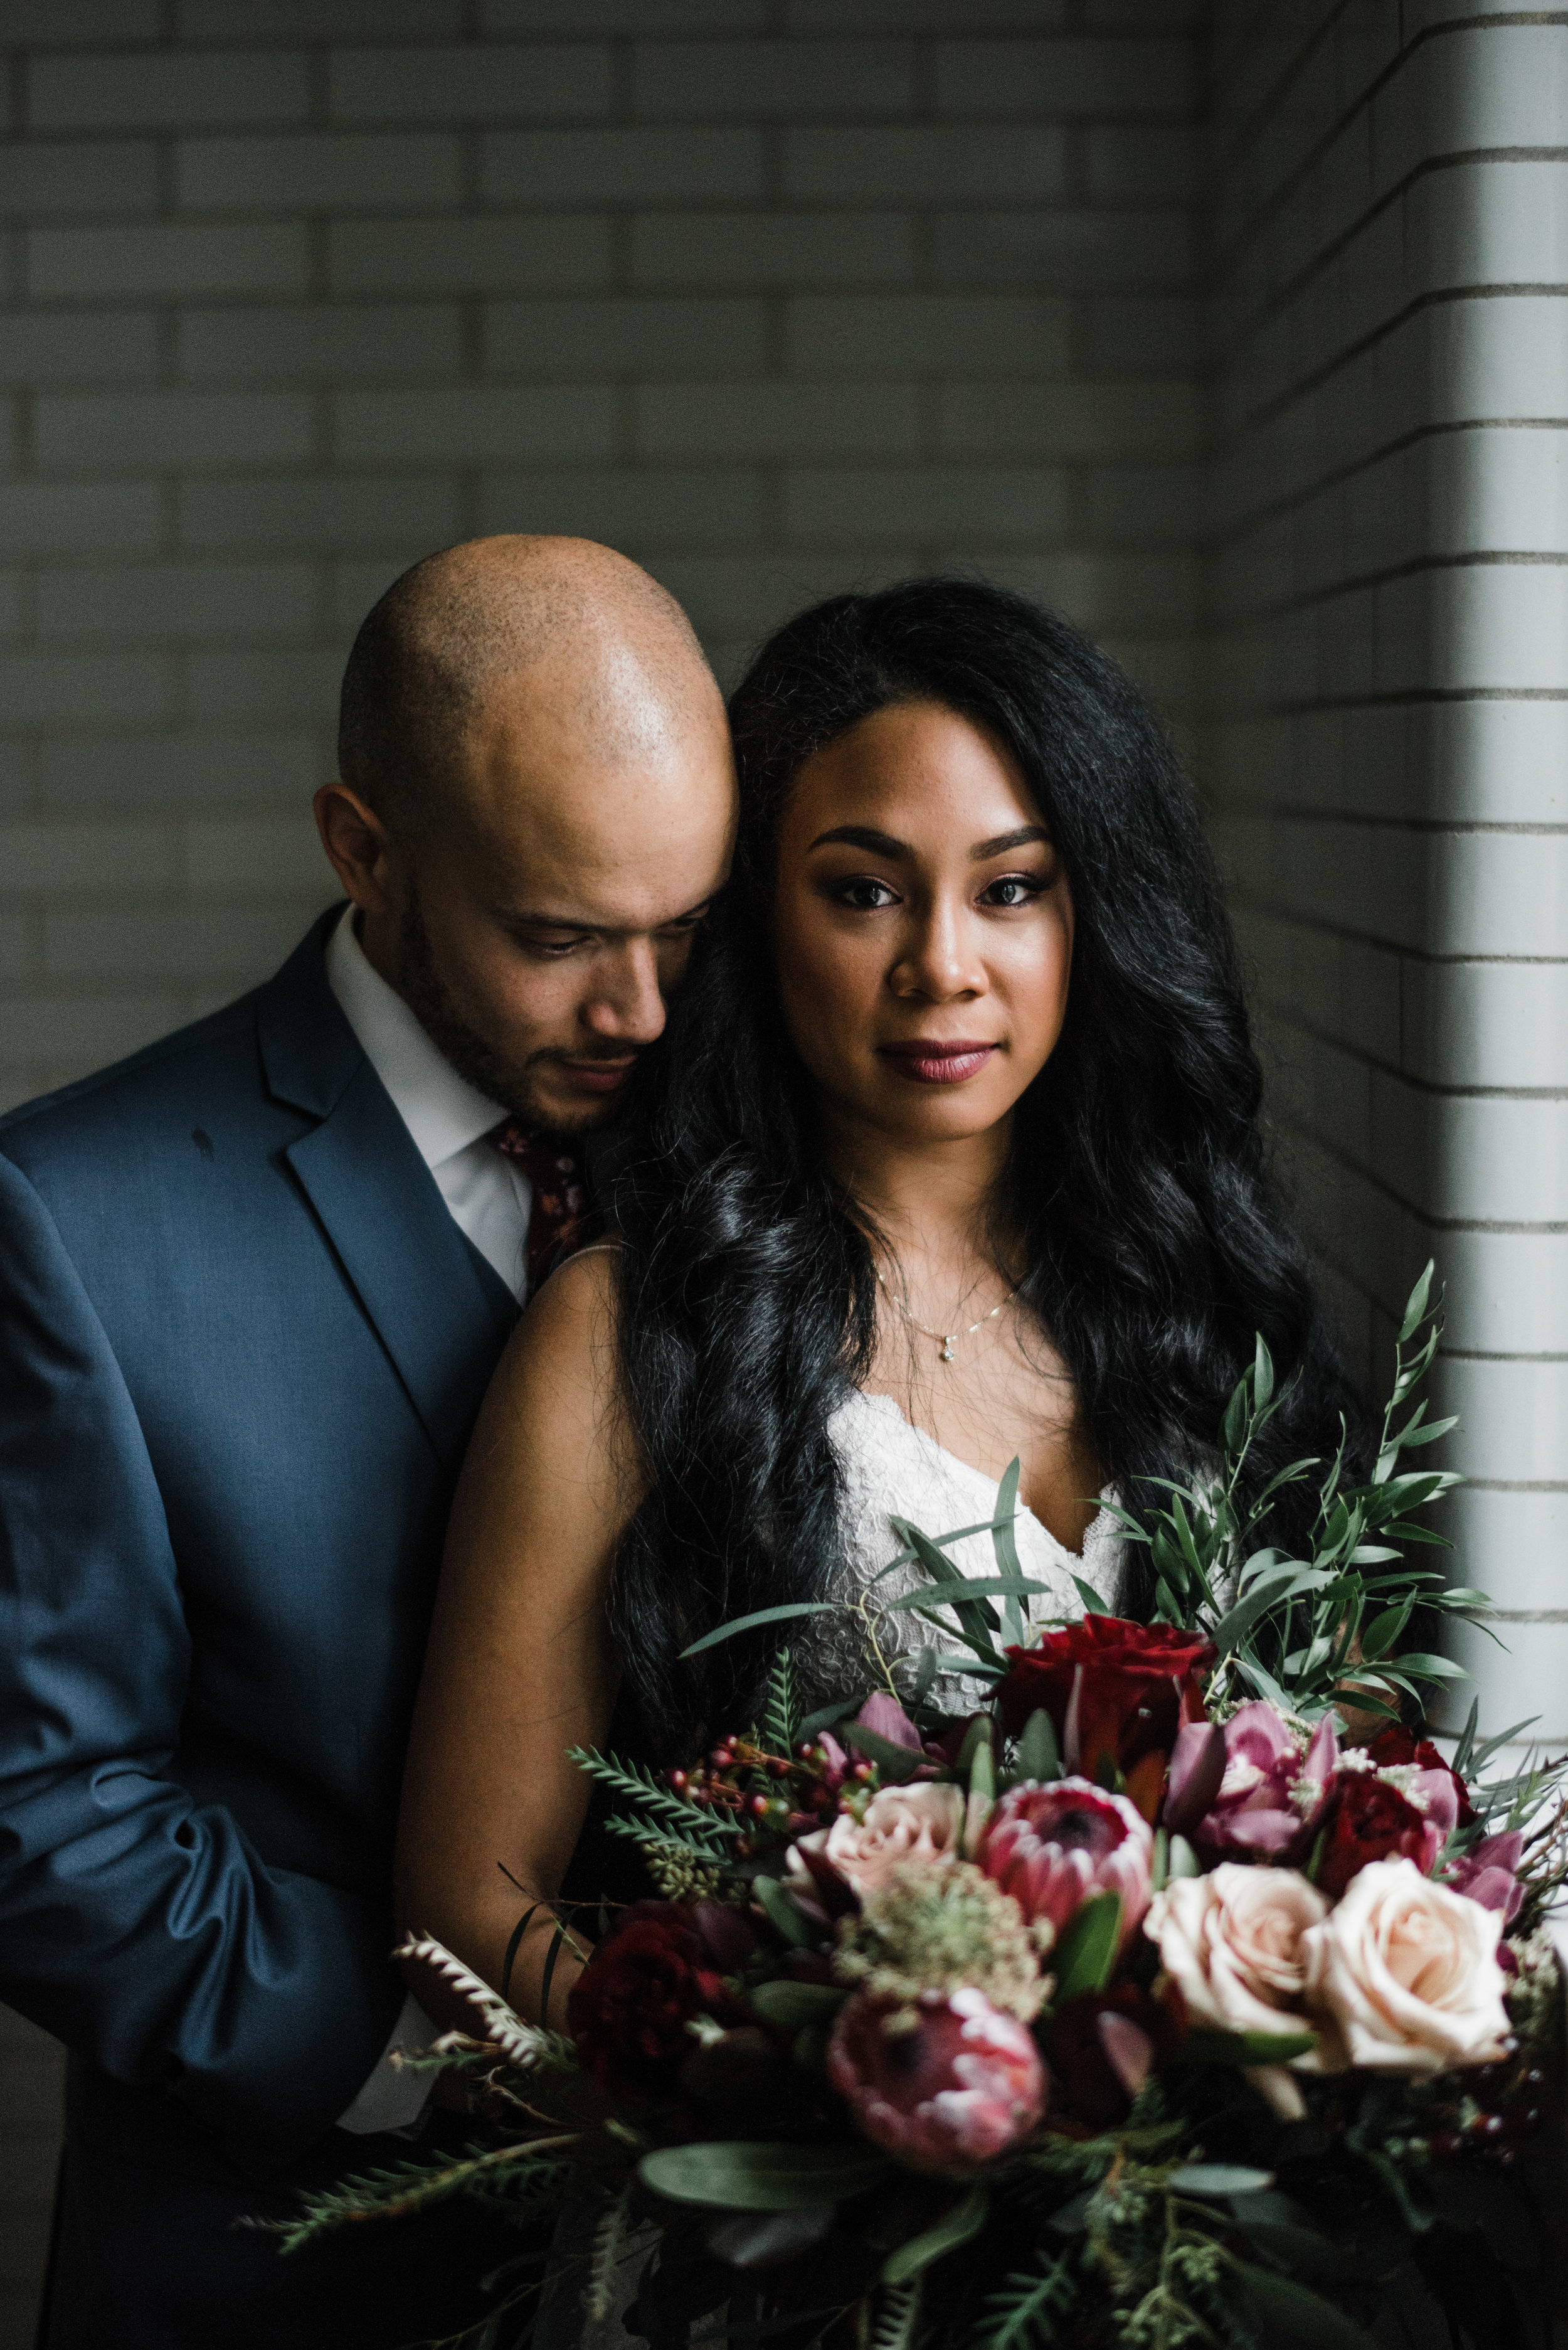  Wedding portrait of bride and groom with protea and roses. Des Moines, IA. Photographed by Austin Day. 